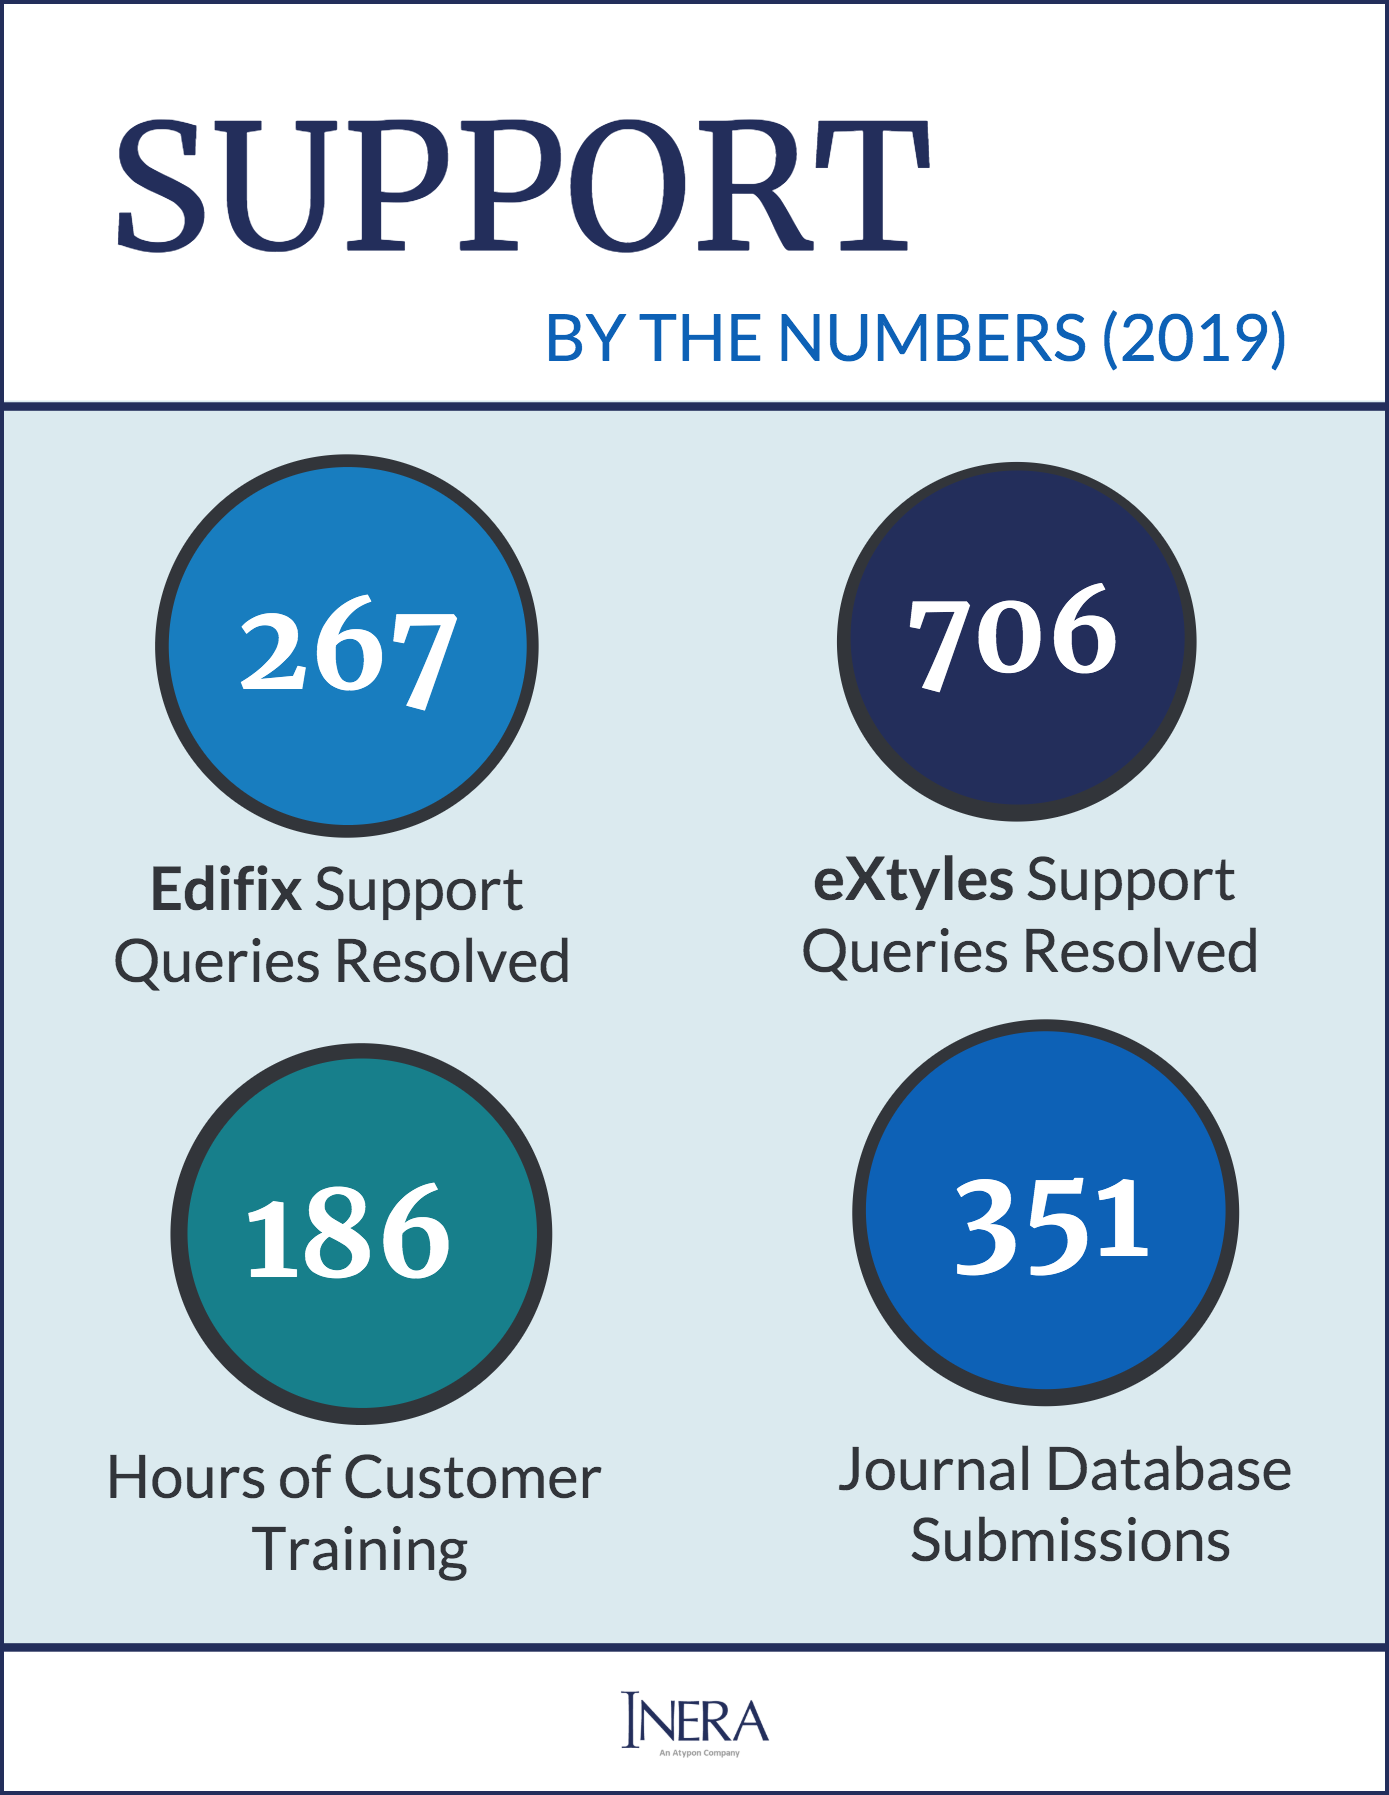 Infographic: Support by the numbers (2019). 267 Edifix support queries resolved; 706 eXtyles support queries resolved; 186 hours of customer training; 351 journal database submissions.